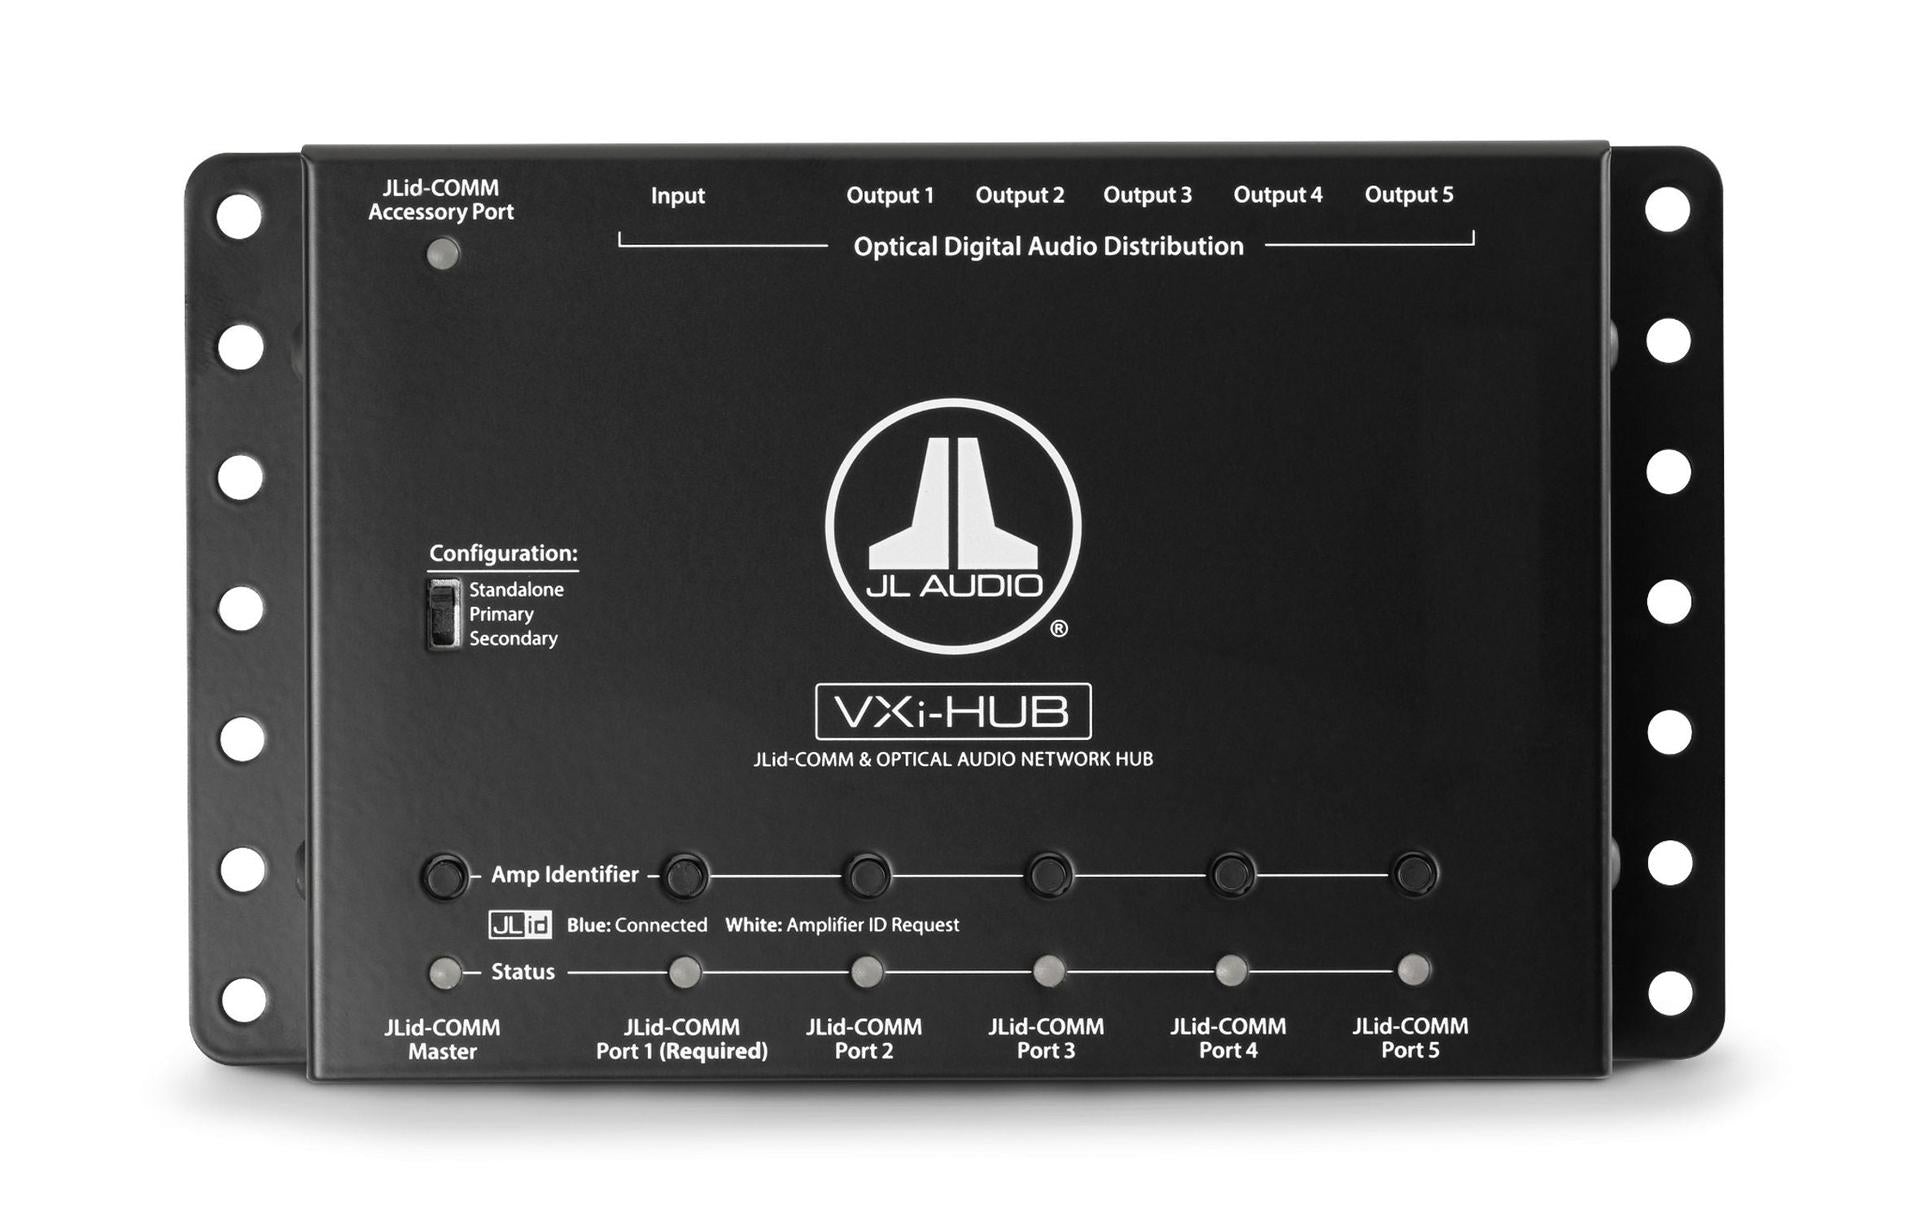 JL Audio VXi-HUB Allows you to connect multiple VXi amplifiers in a network